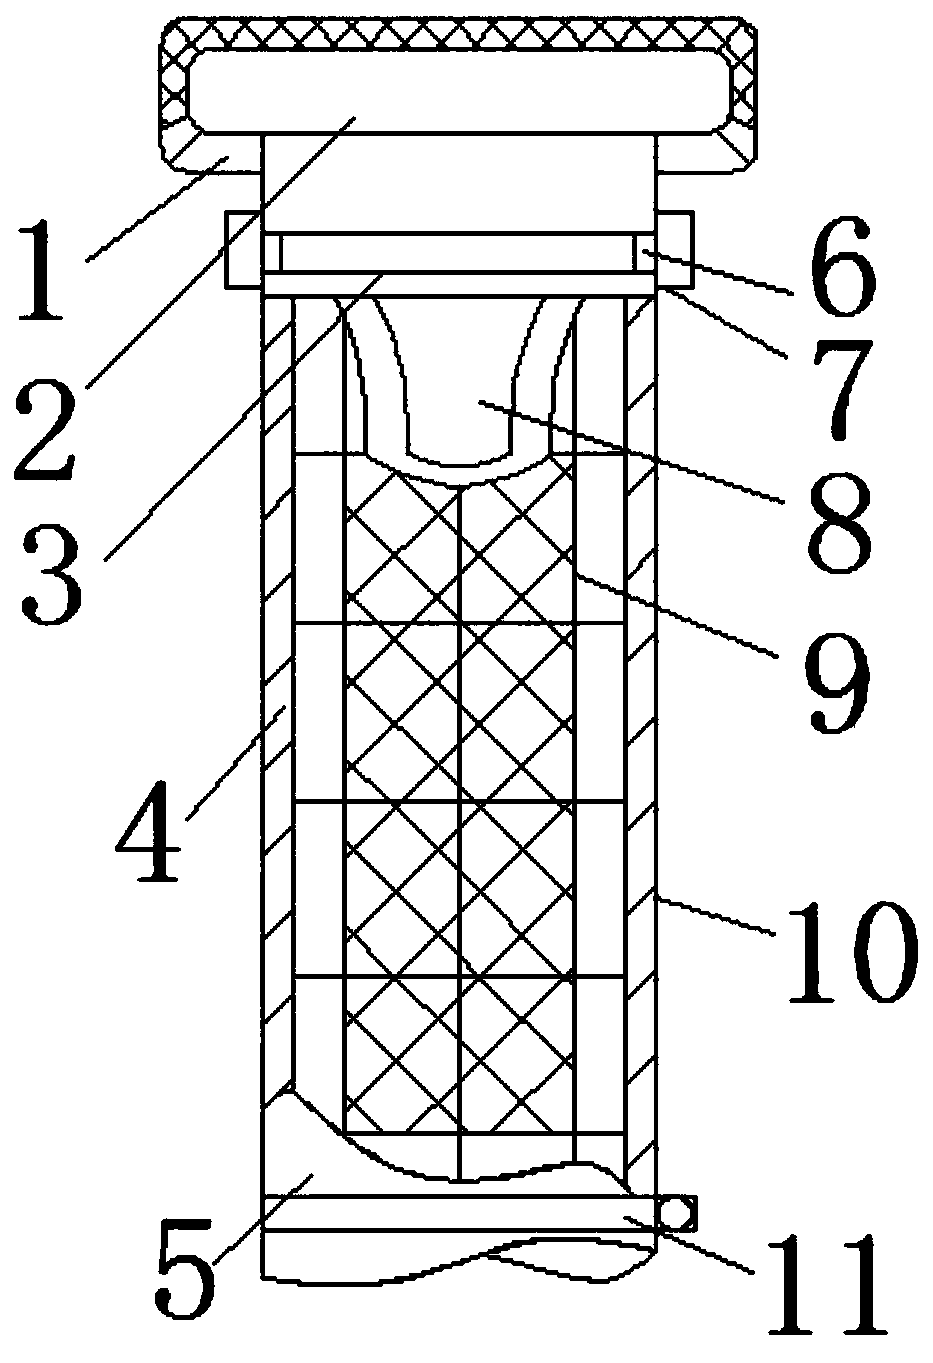 Filter bag structure of dust collector